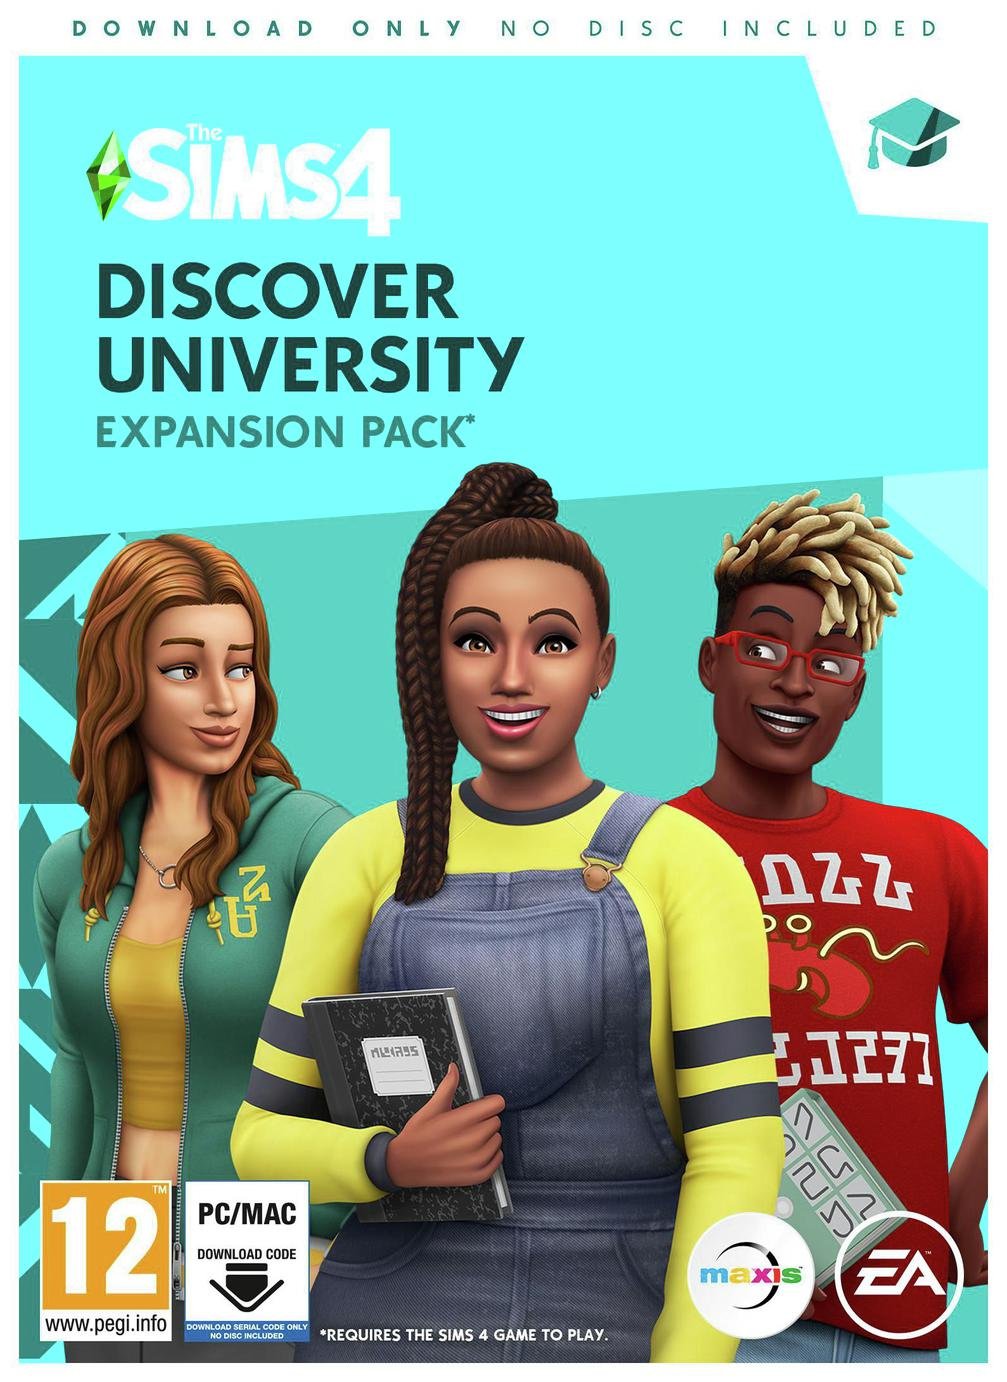 The Sims 4 Discover University Expansion Pack PC Game